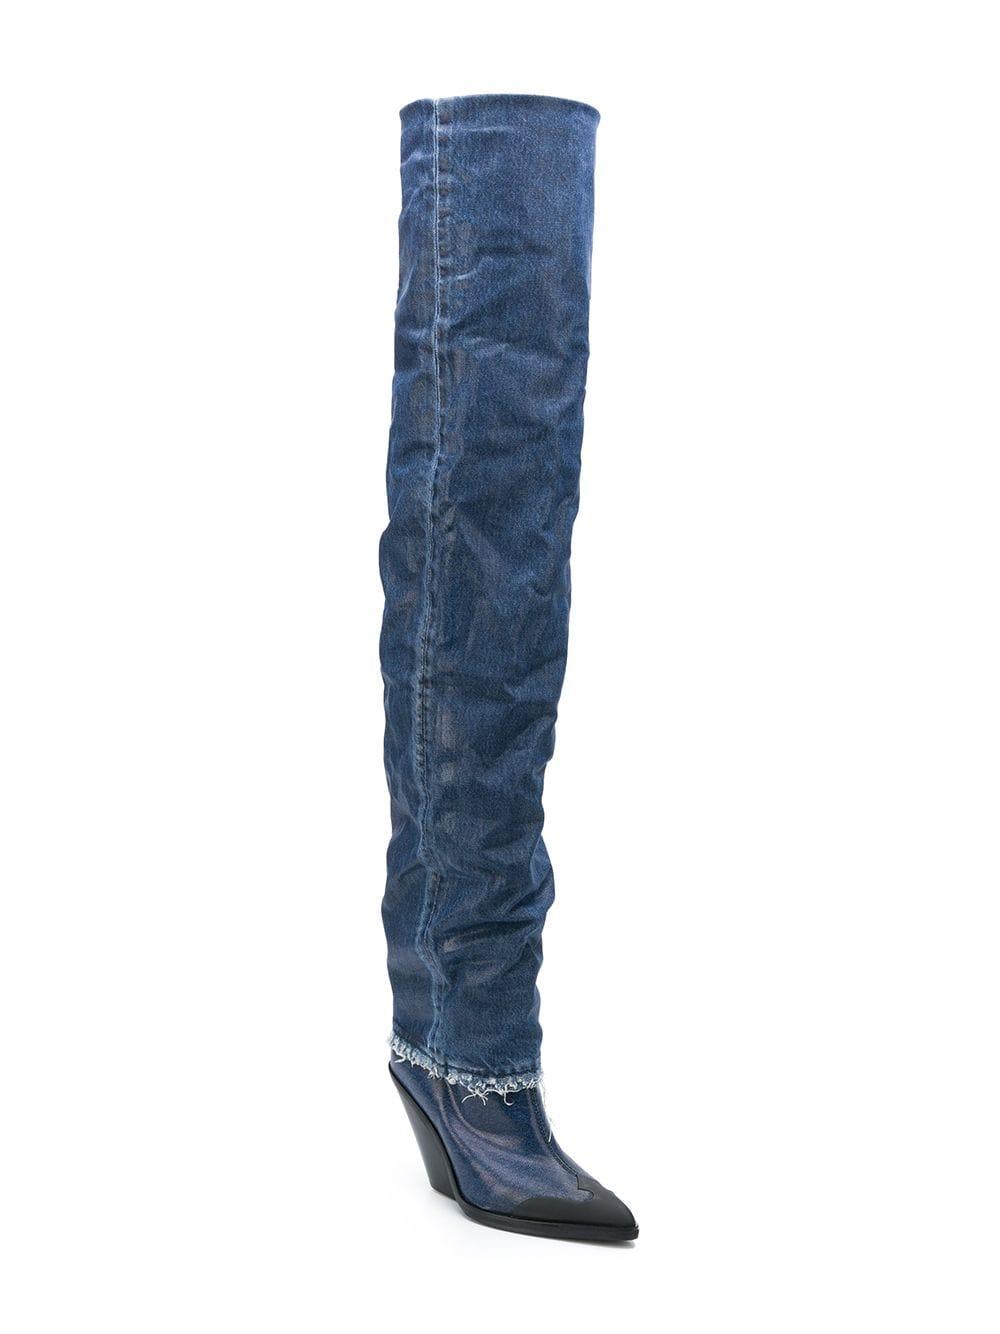 DIESEL Denim Over-the-knee Boots in Blue | Lyst